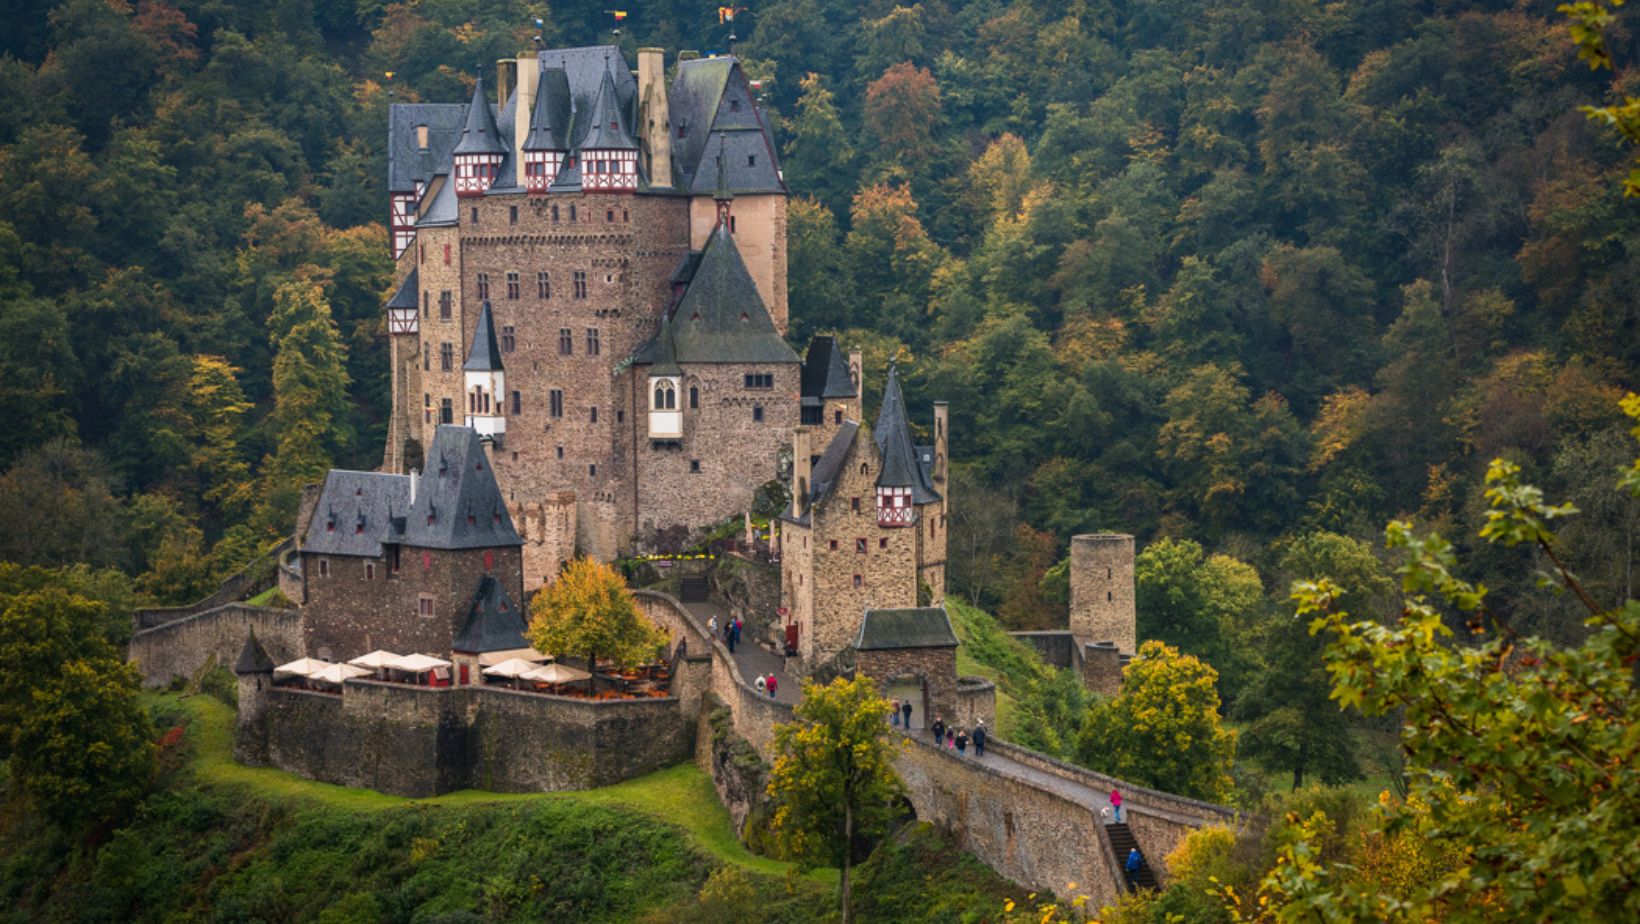 Eltz Castle History and Ownership